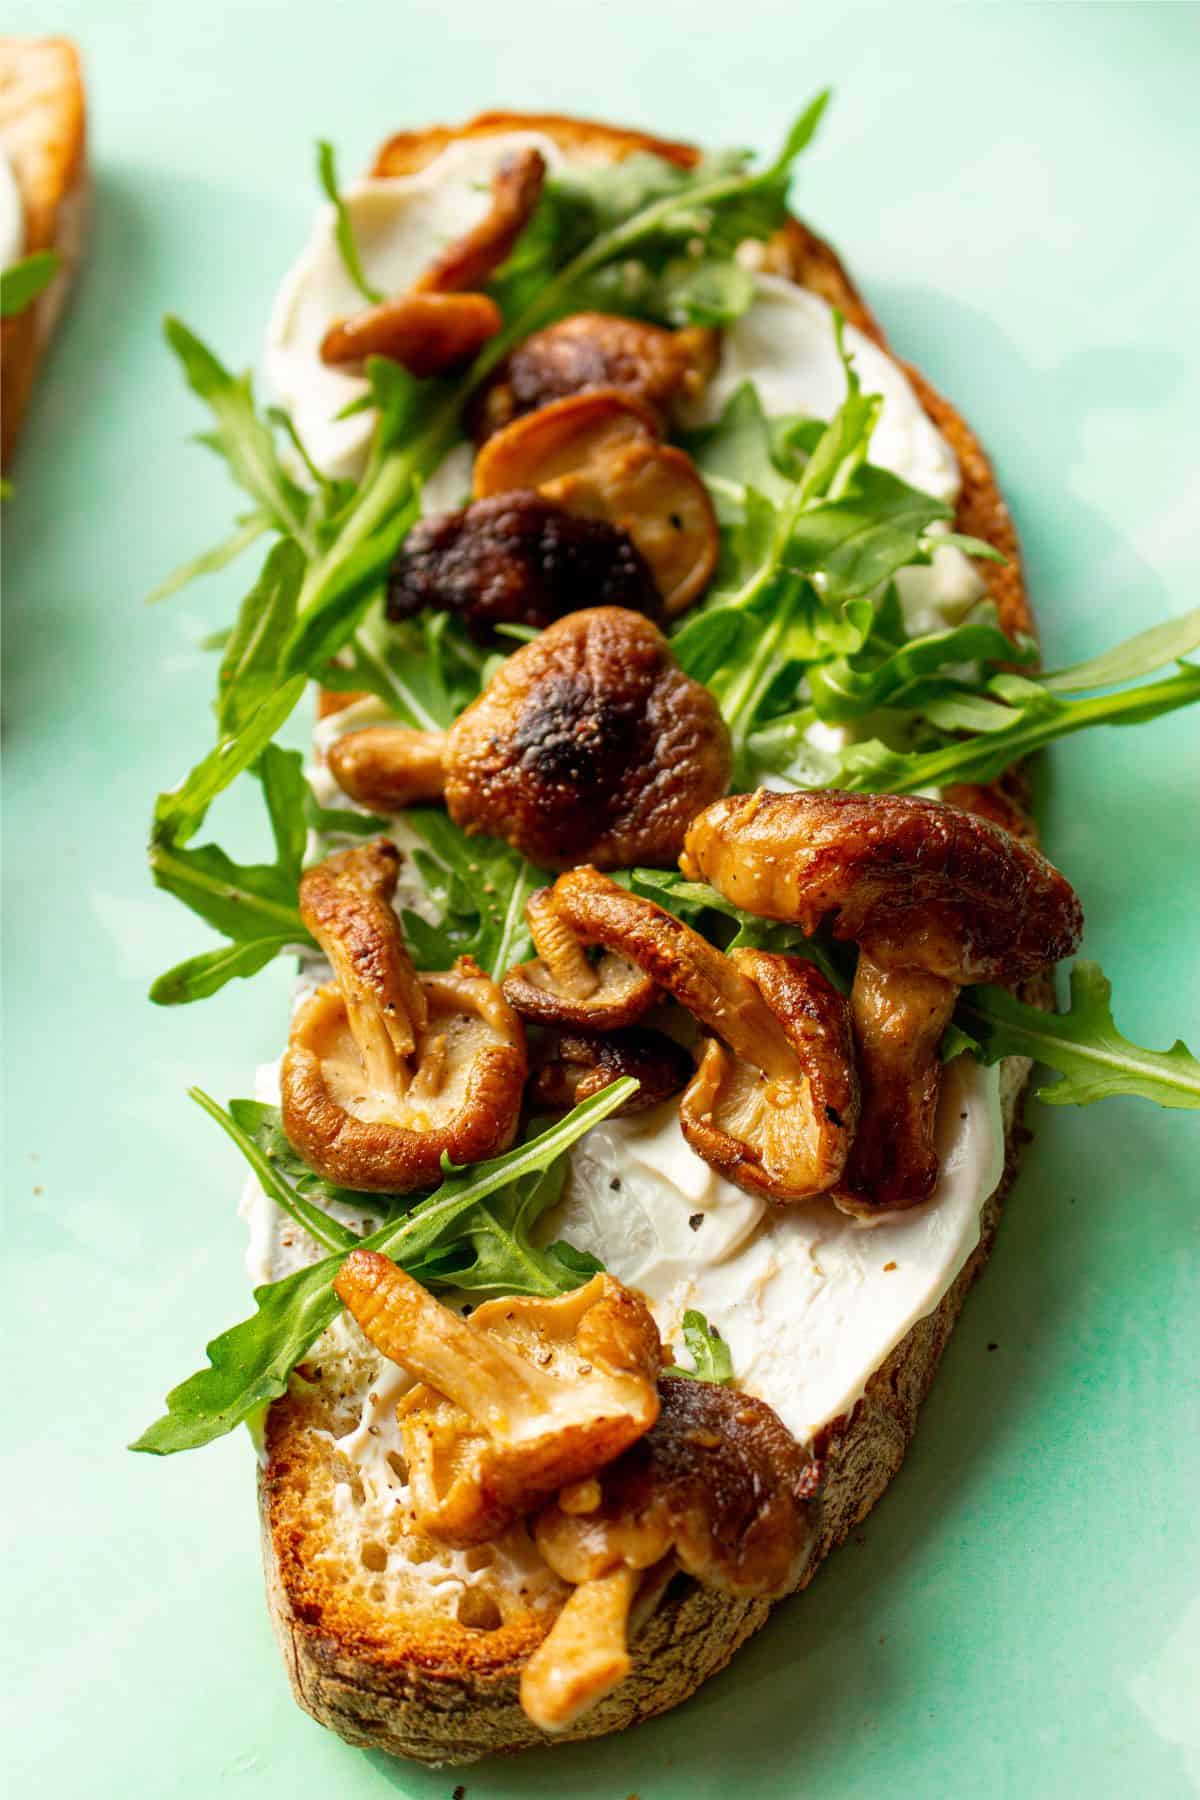 One slice of mushroom toast with cream cheese, browned mushrooms and rocket on a pale green background.